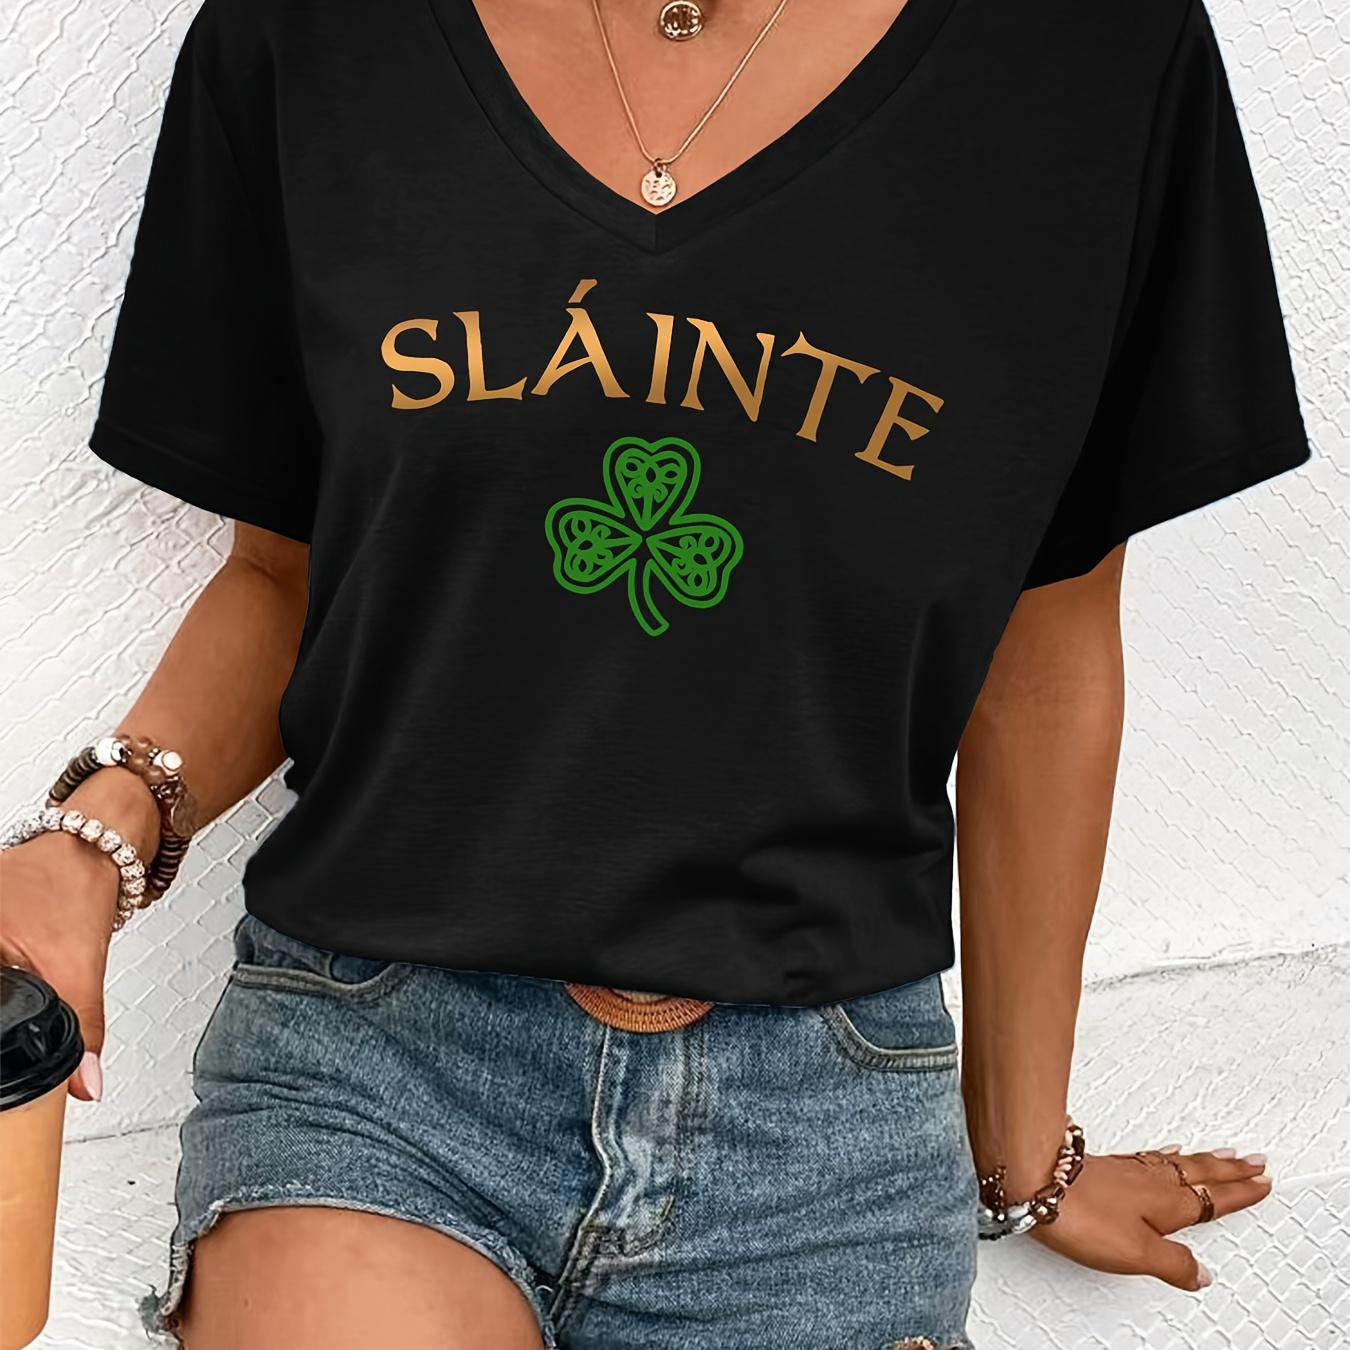 

Clover & Letter Print Casual T-shirt, V Neck Short Sleeves Stretchy Sports Tee, St. Patrick's Day Women's Comfy Tops